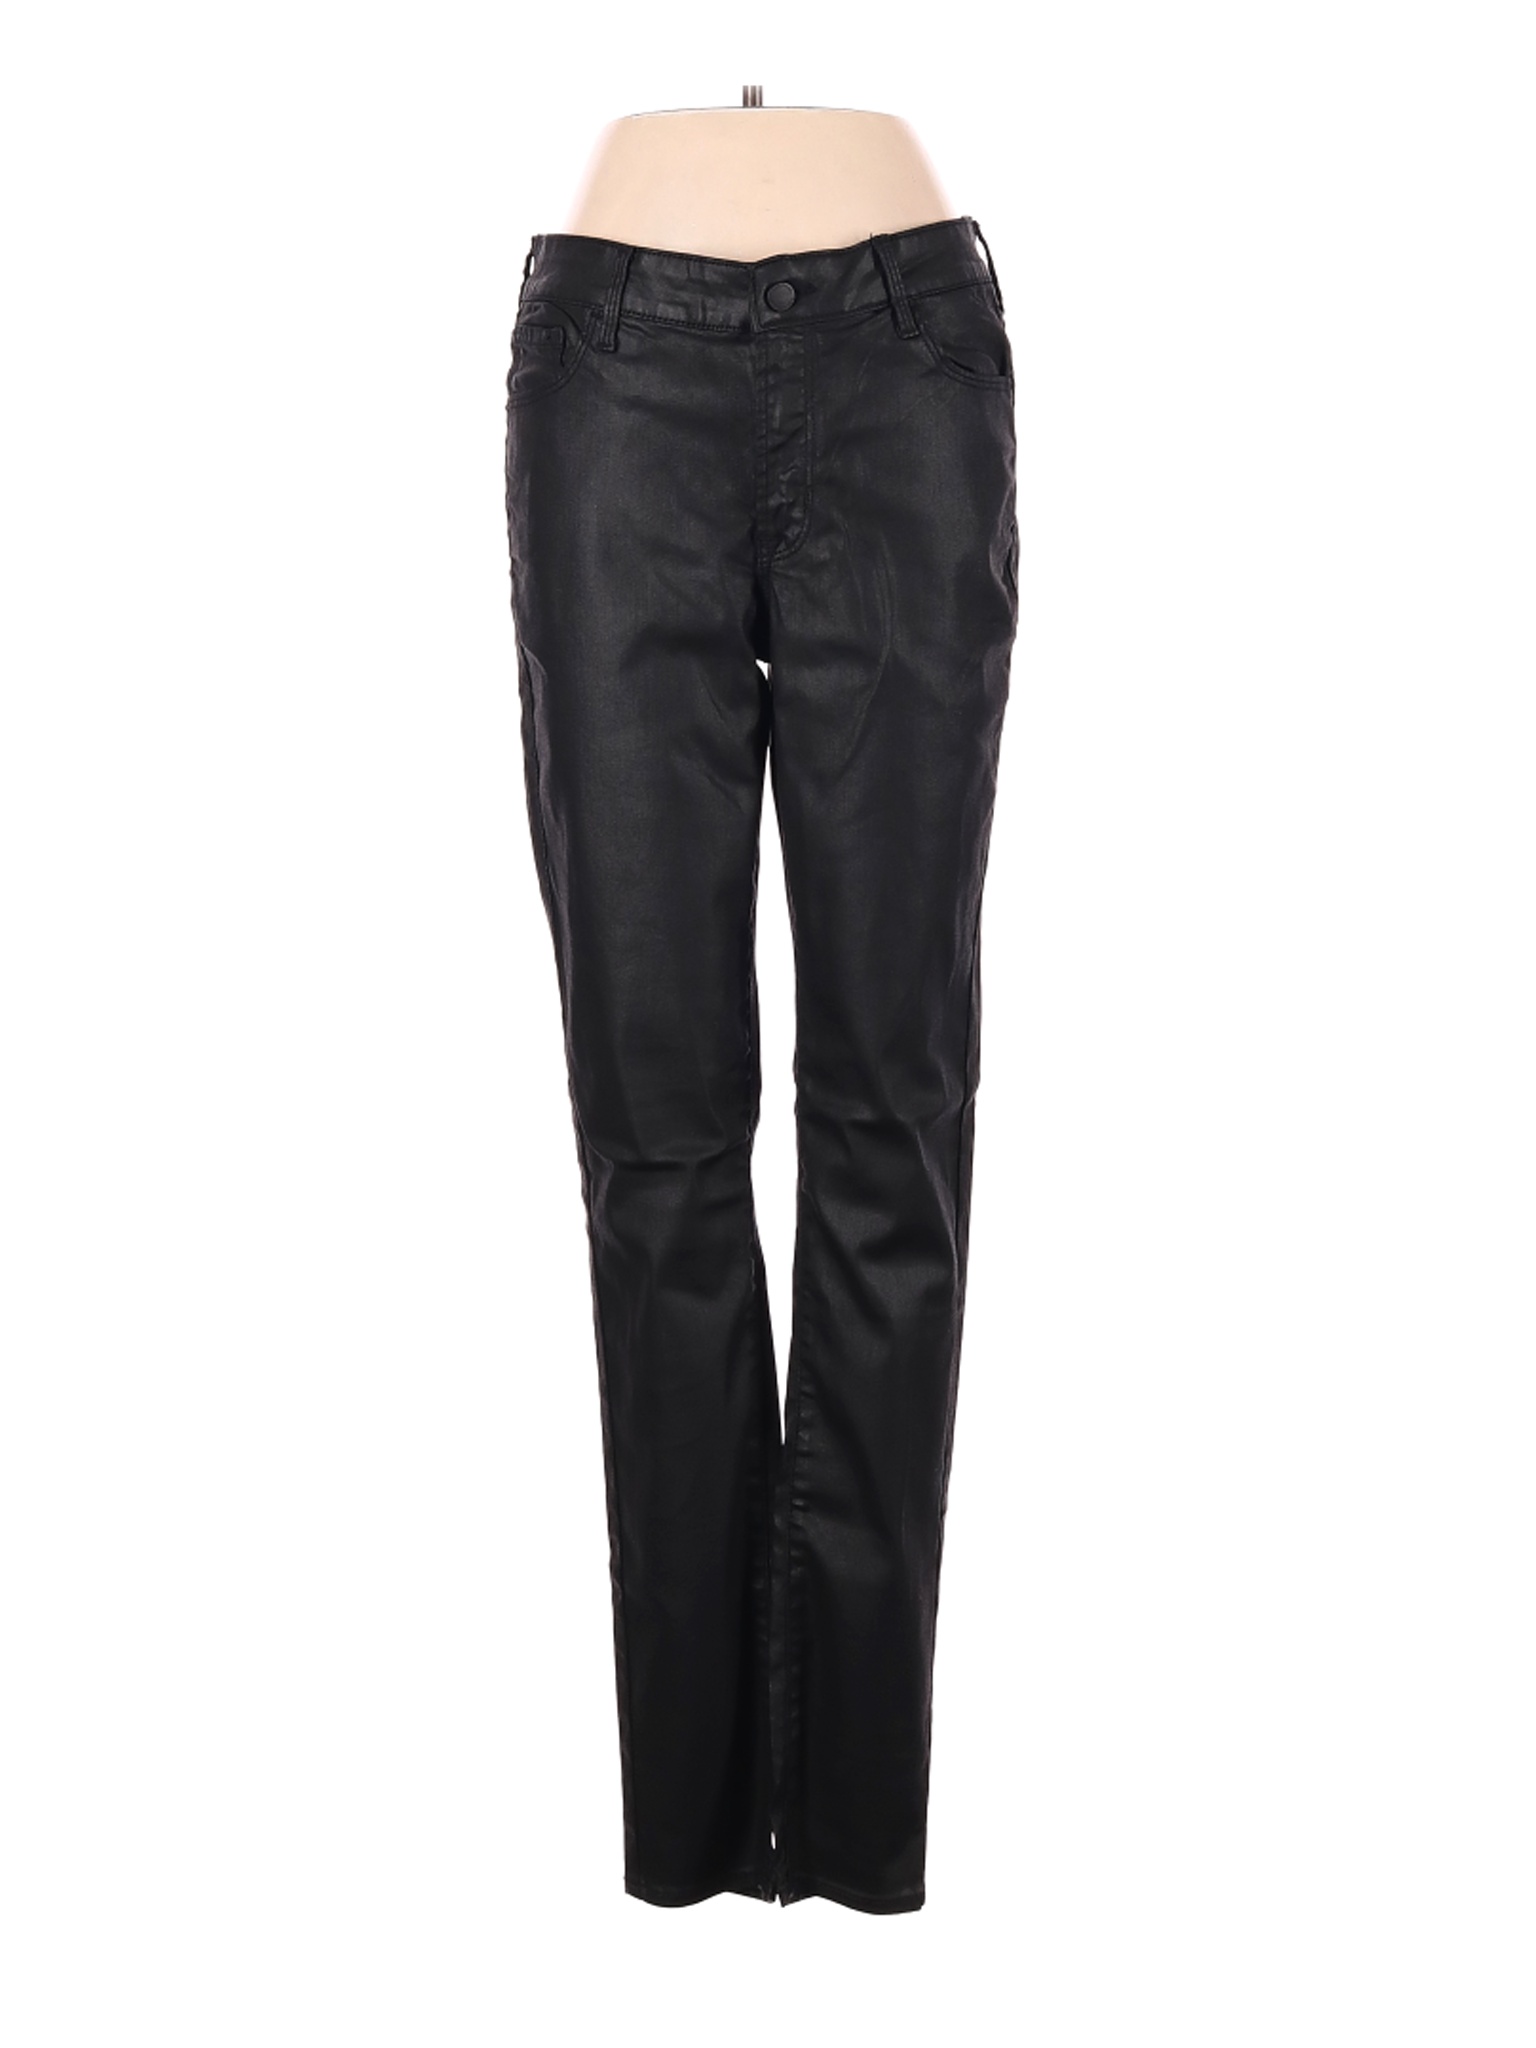 navy leather pants